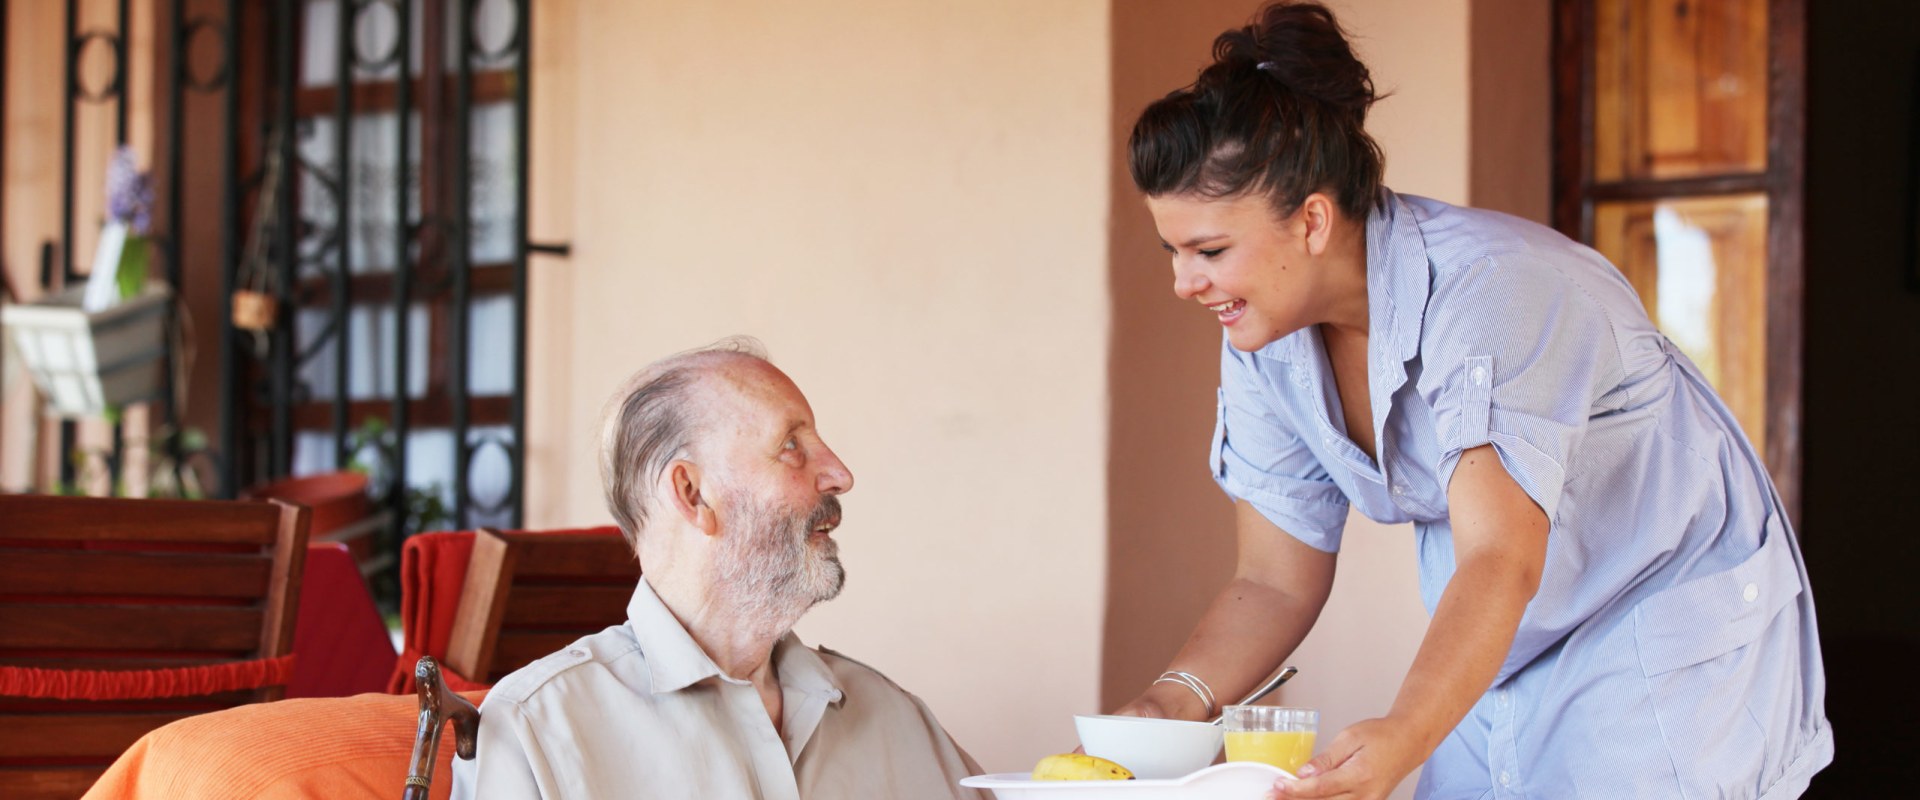 What Types of Educational Services are Available in Elder Home Care Settings?